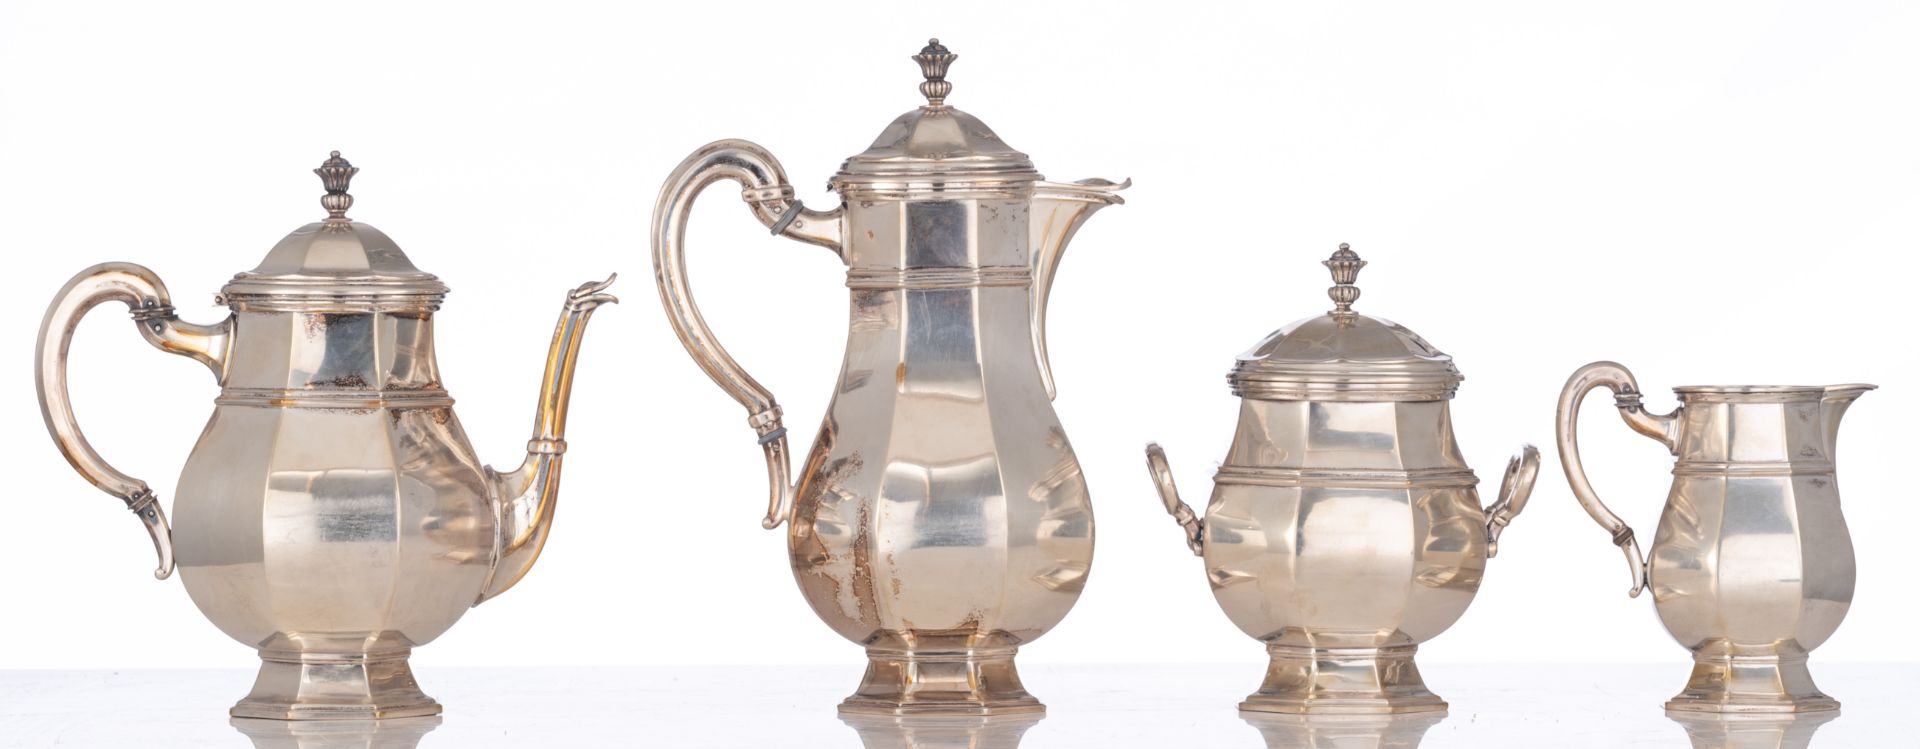 A five-piece Neoclassical silver coffee and tea set, made by Wolfers - Belgium (between 1892 - 1942) - Image 4 of 17